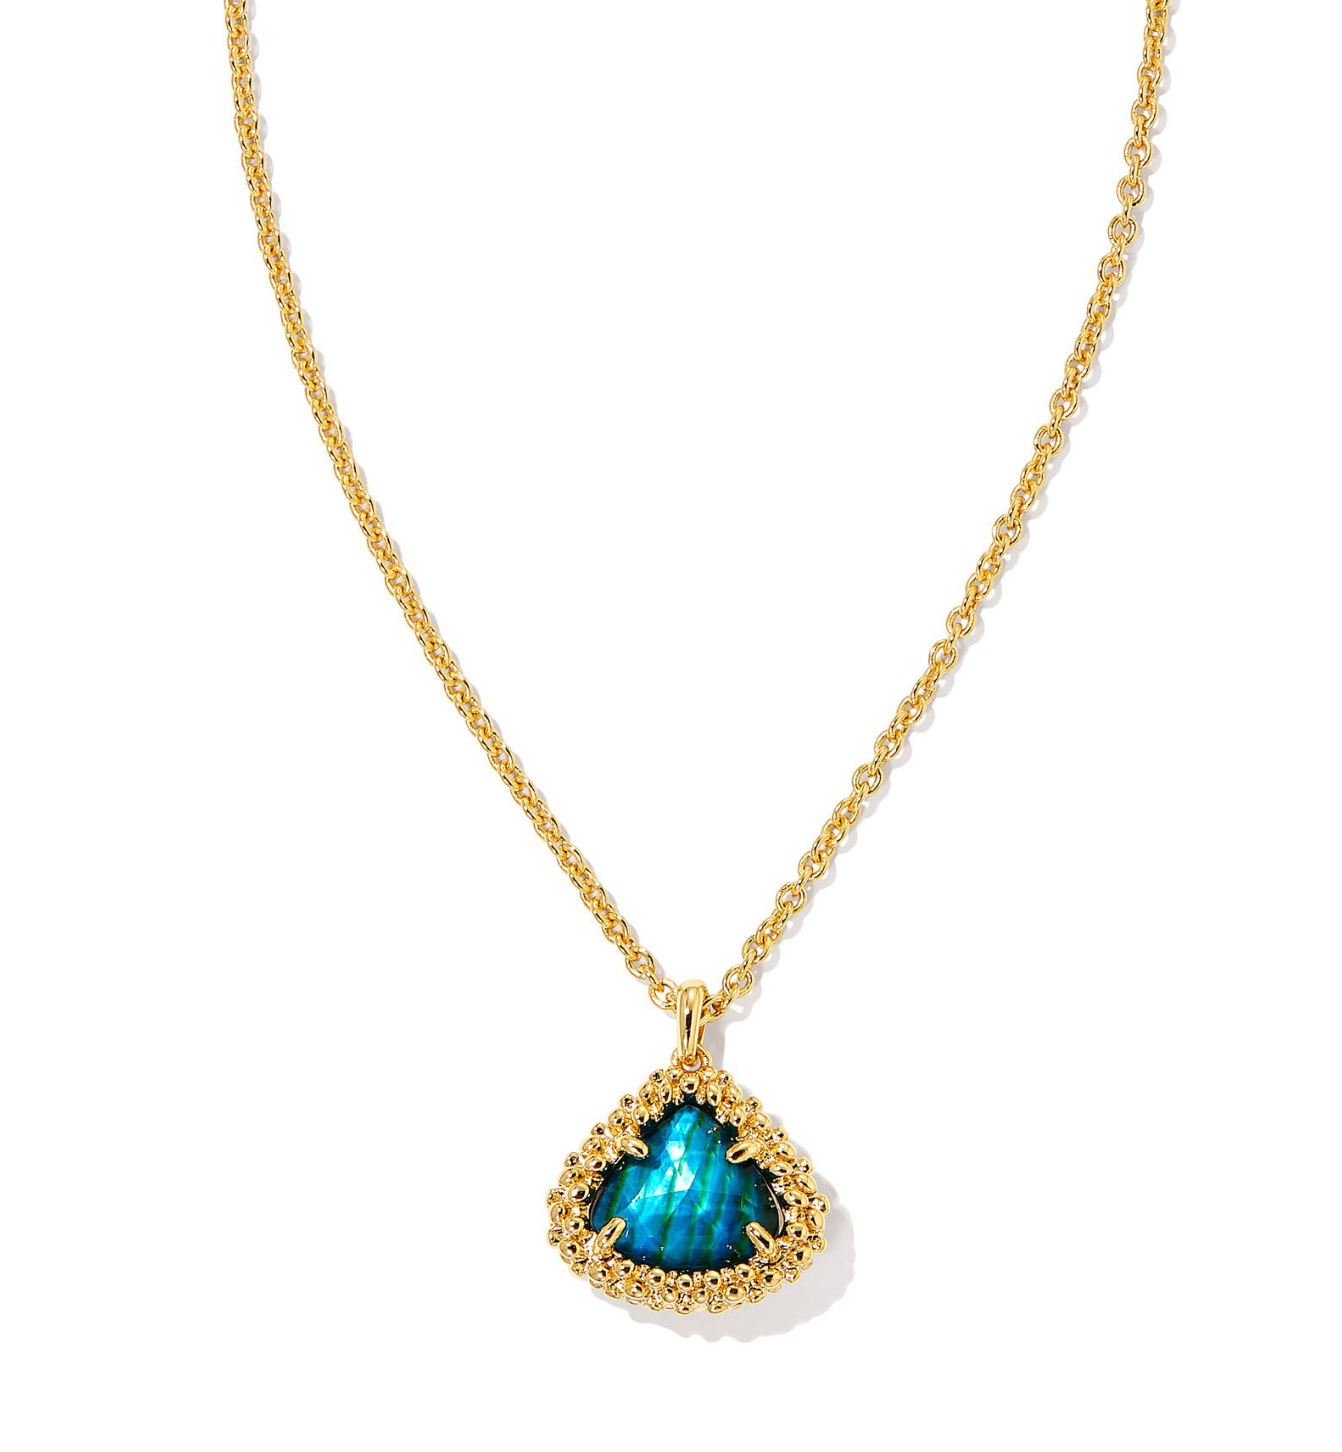 Framed Kendall Gold Short Pendant Necklace in Teal Abalone | KENDRA SCOTT - The Street Boutique 